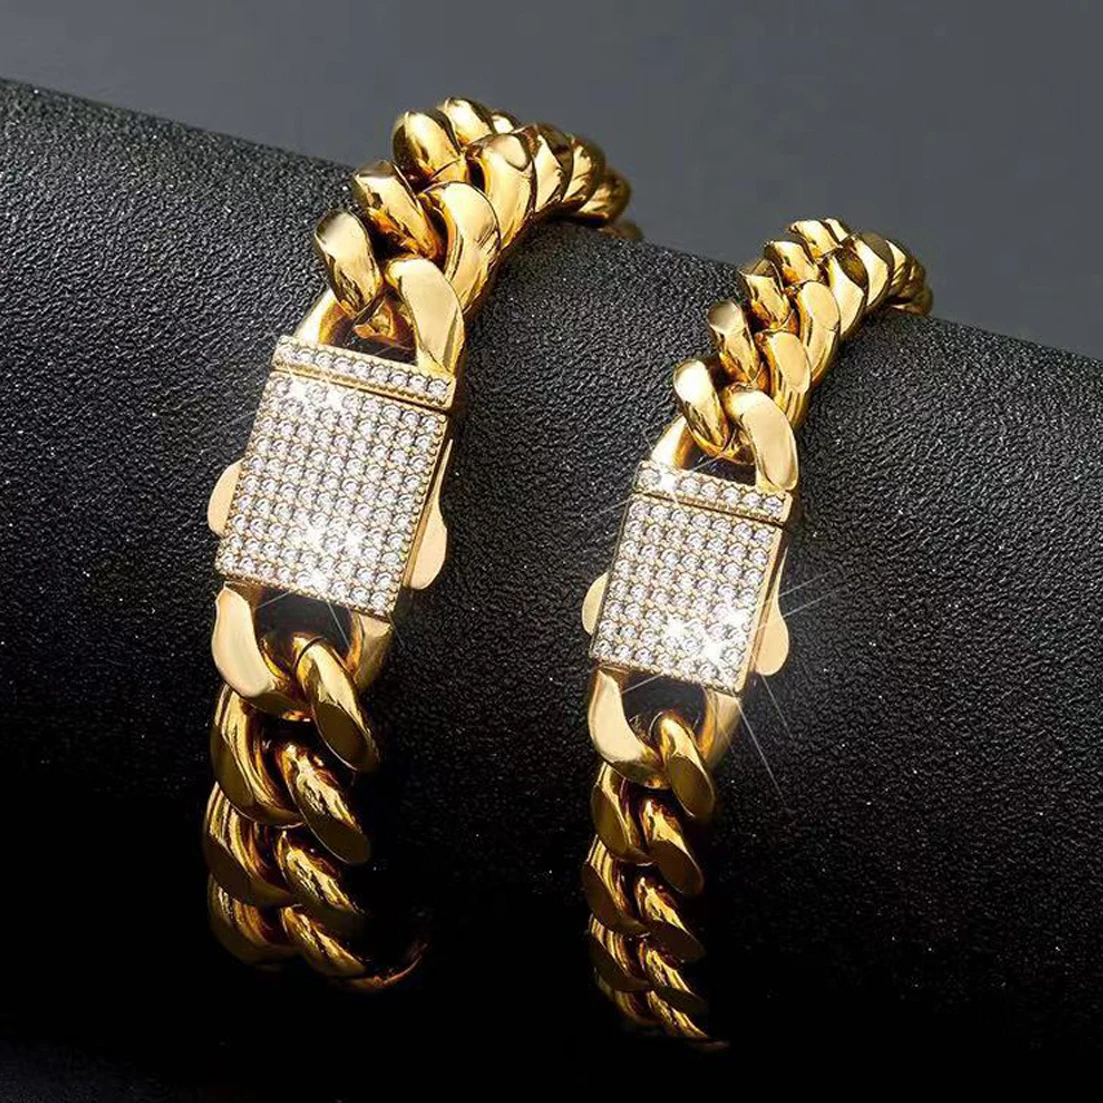 

6/8/10/12/14mm Wide Stainless Steel Women Men's Gold Color Curb Cuban Link Chain Miami Bracelet Bangle Jewelry